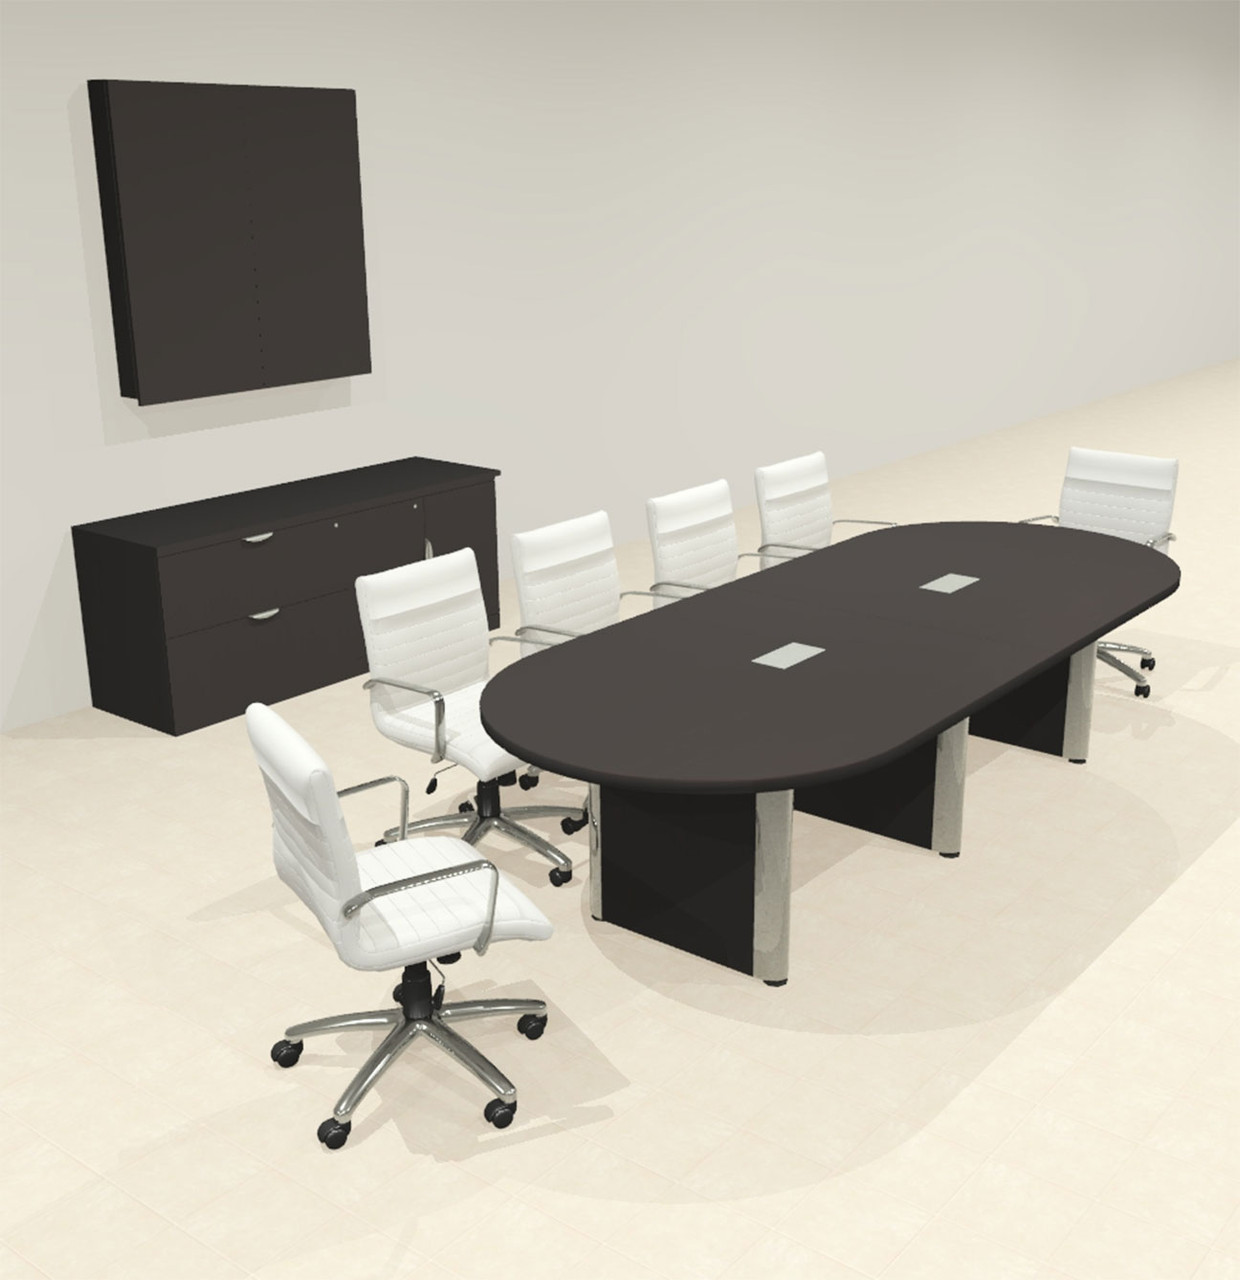 Racetrack Cable Management 10' Feet Conference Table, #OF-CON-CRP7